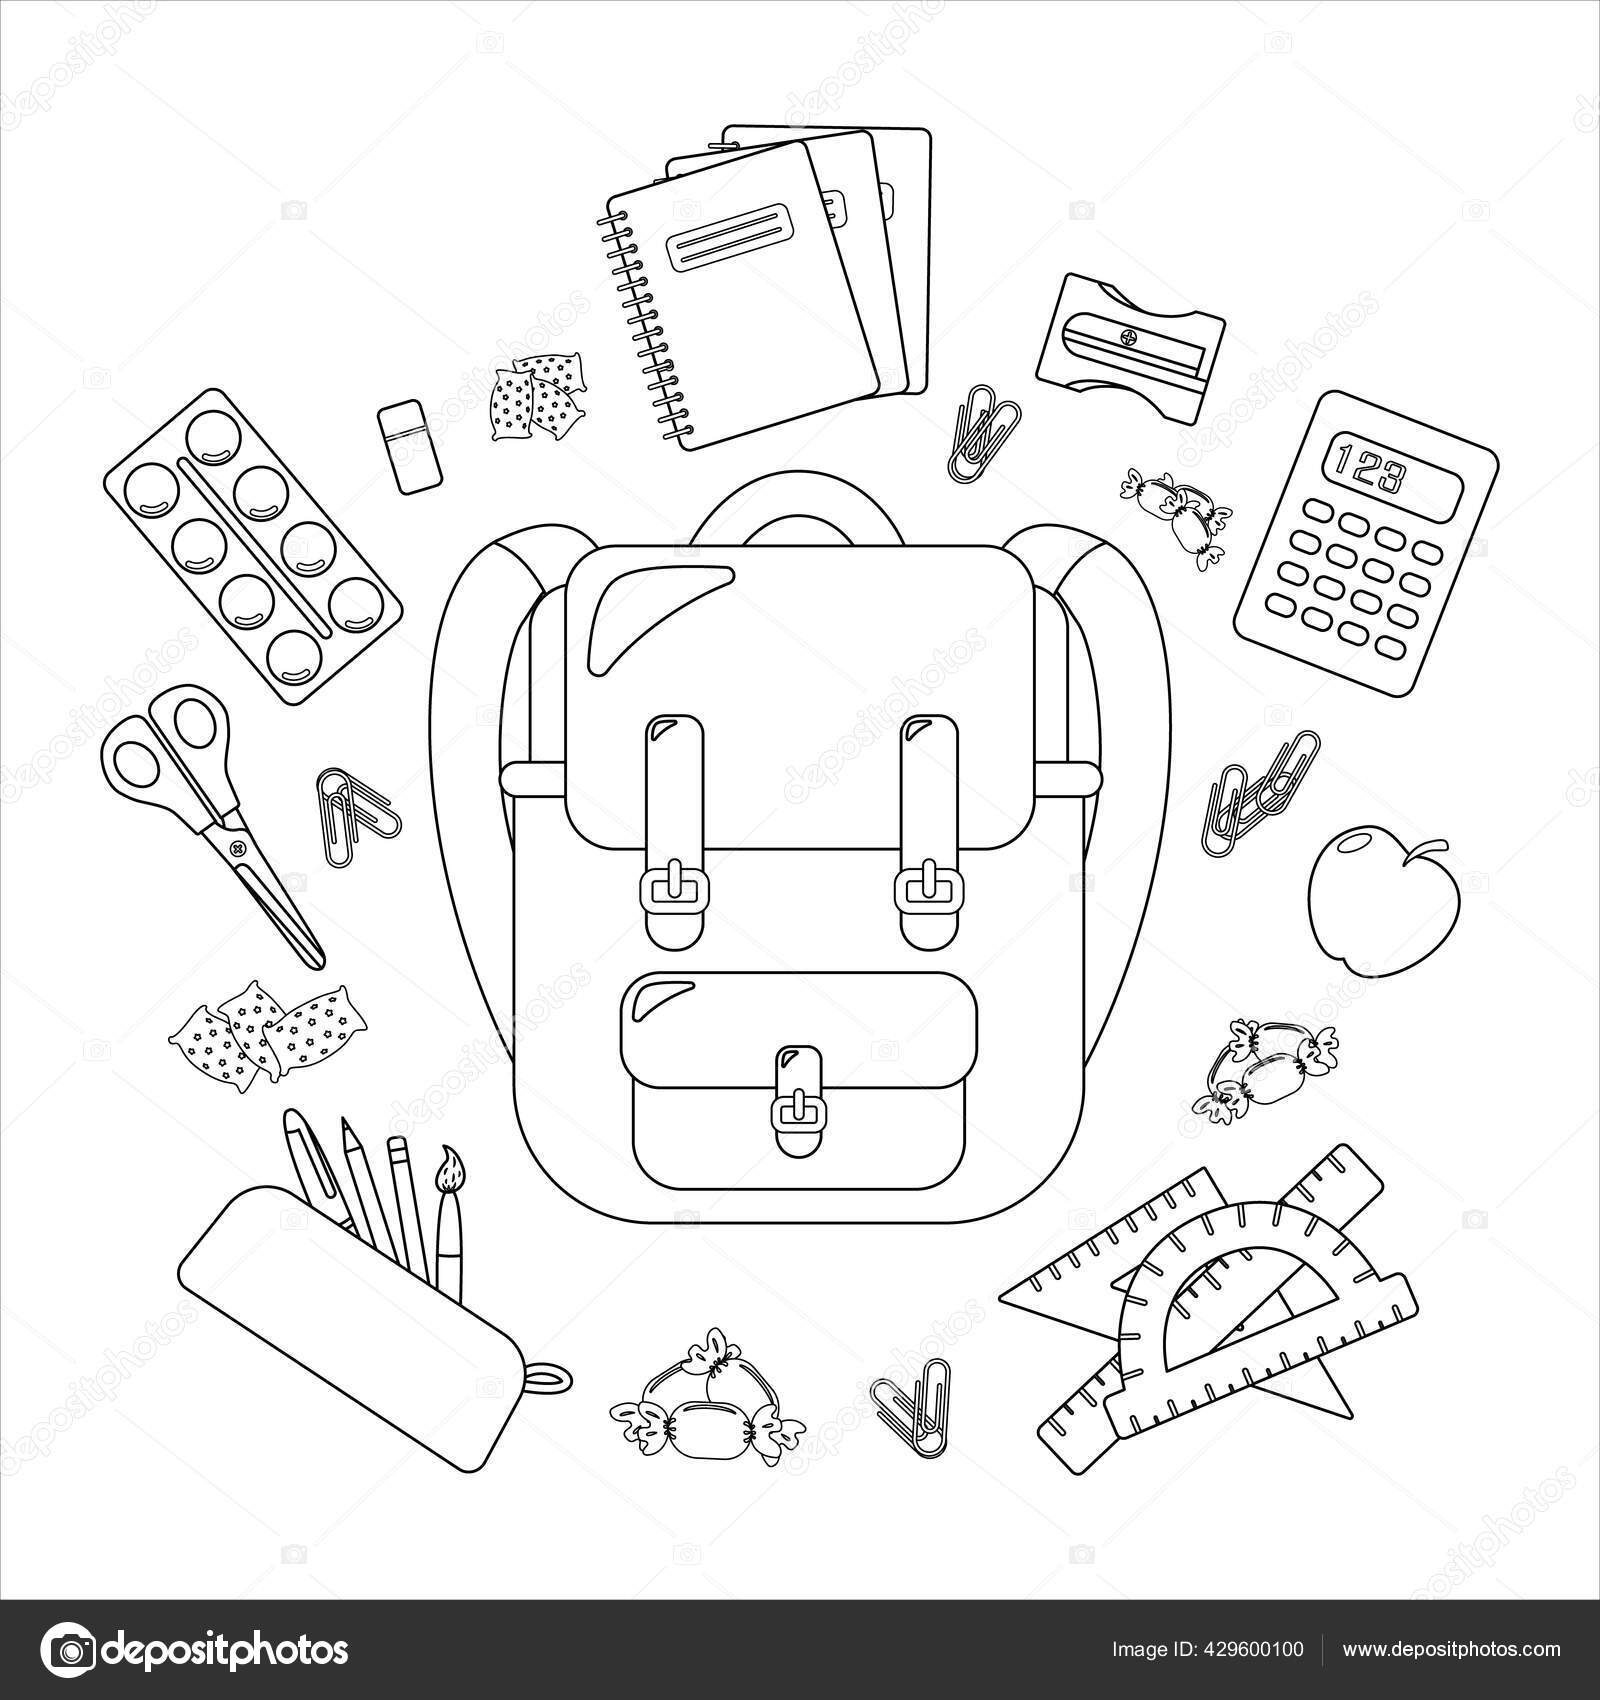 Download Ruler School Supplies Drawing Material Royalty-Free Stock